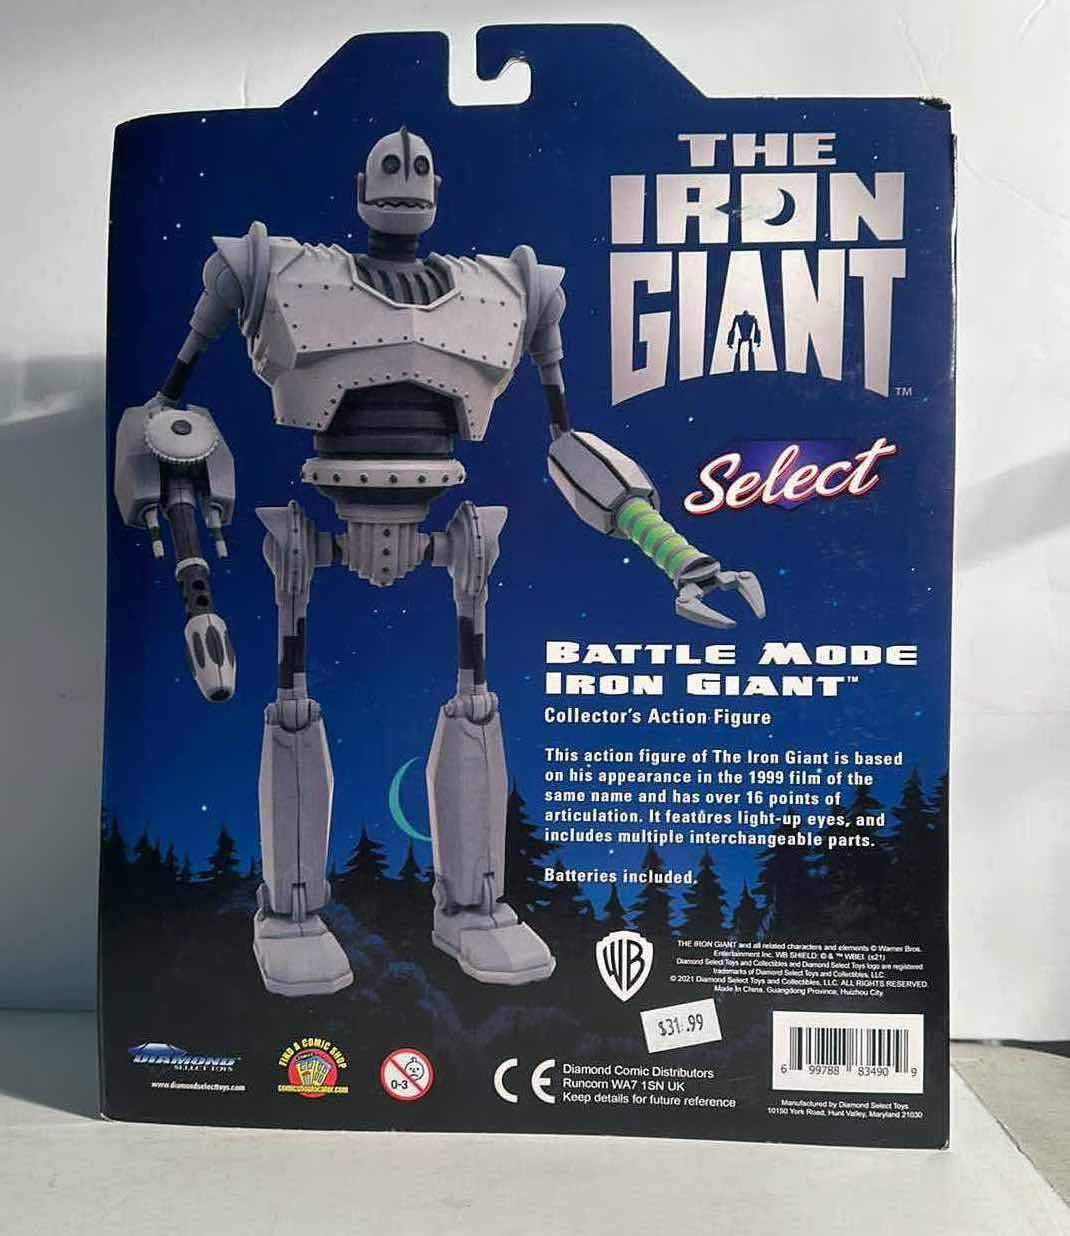 Photo 2 of THE IRON GIANT SELECTION “BATTLE MODE” COLLECTOR’S ACTION FIGURE -RETAIL PRICE $32